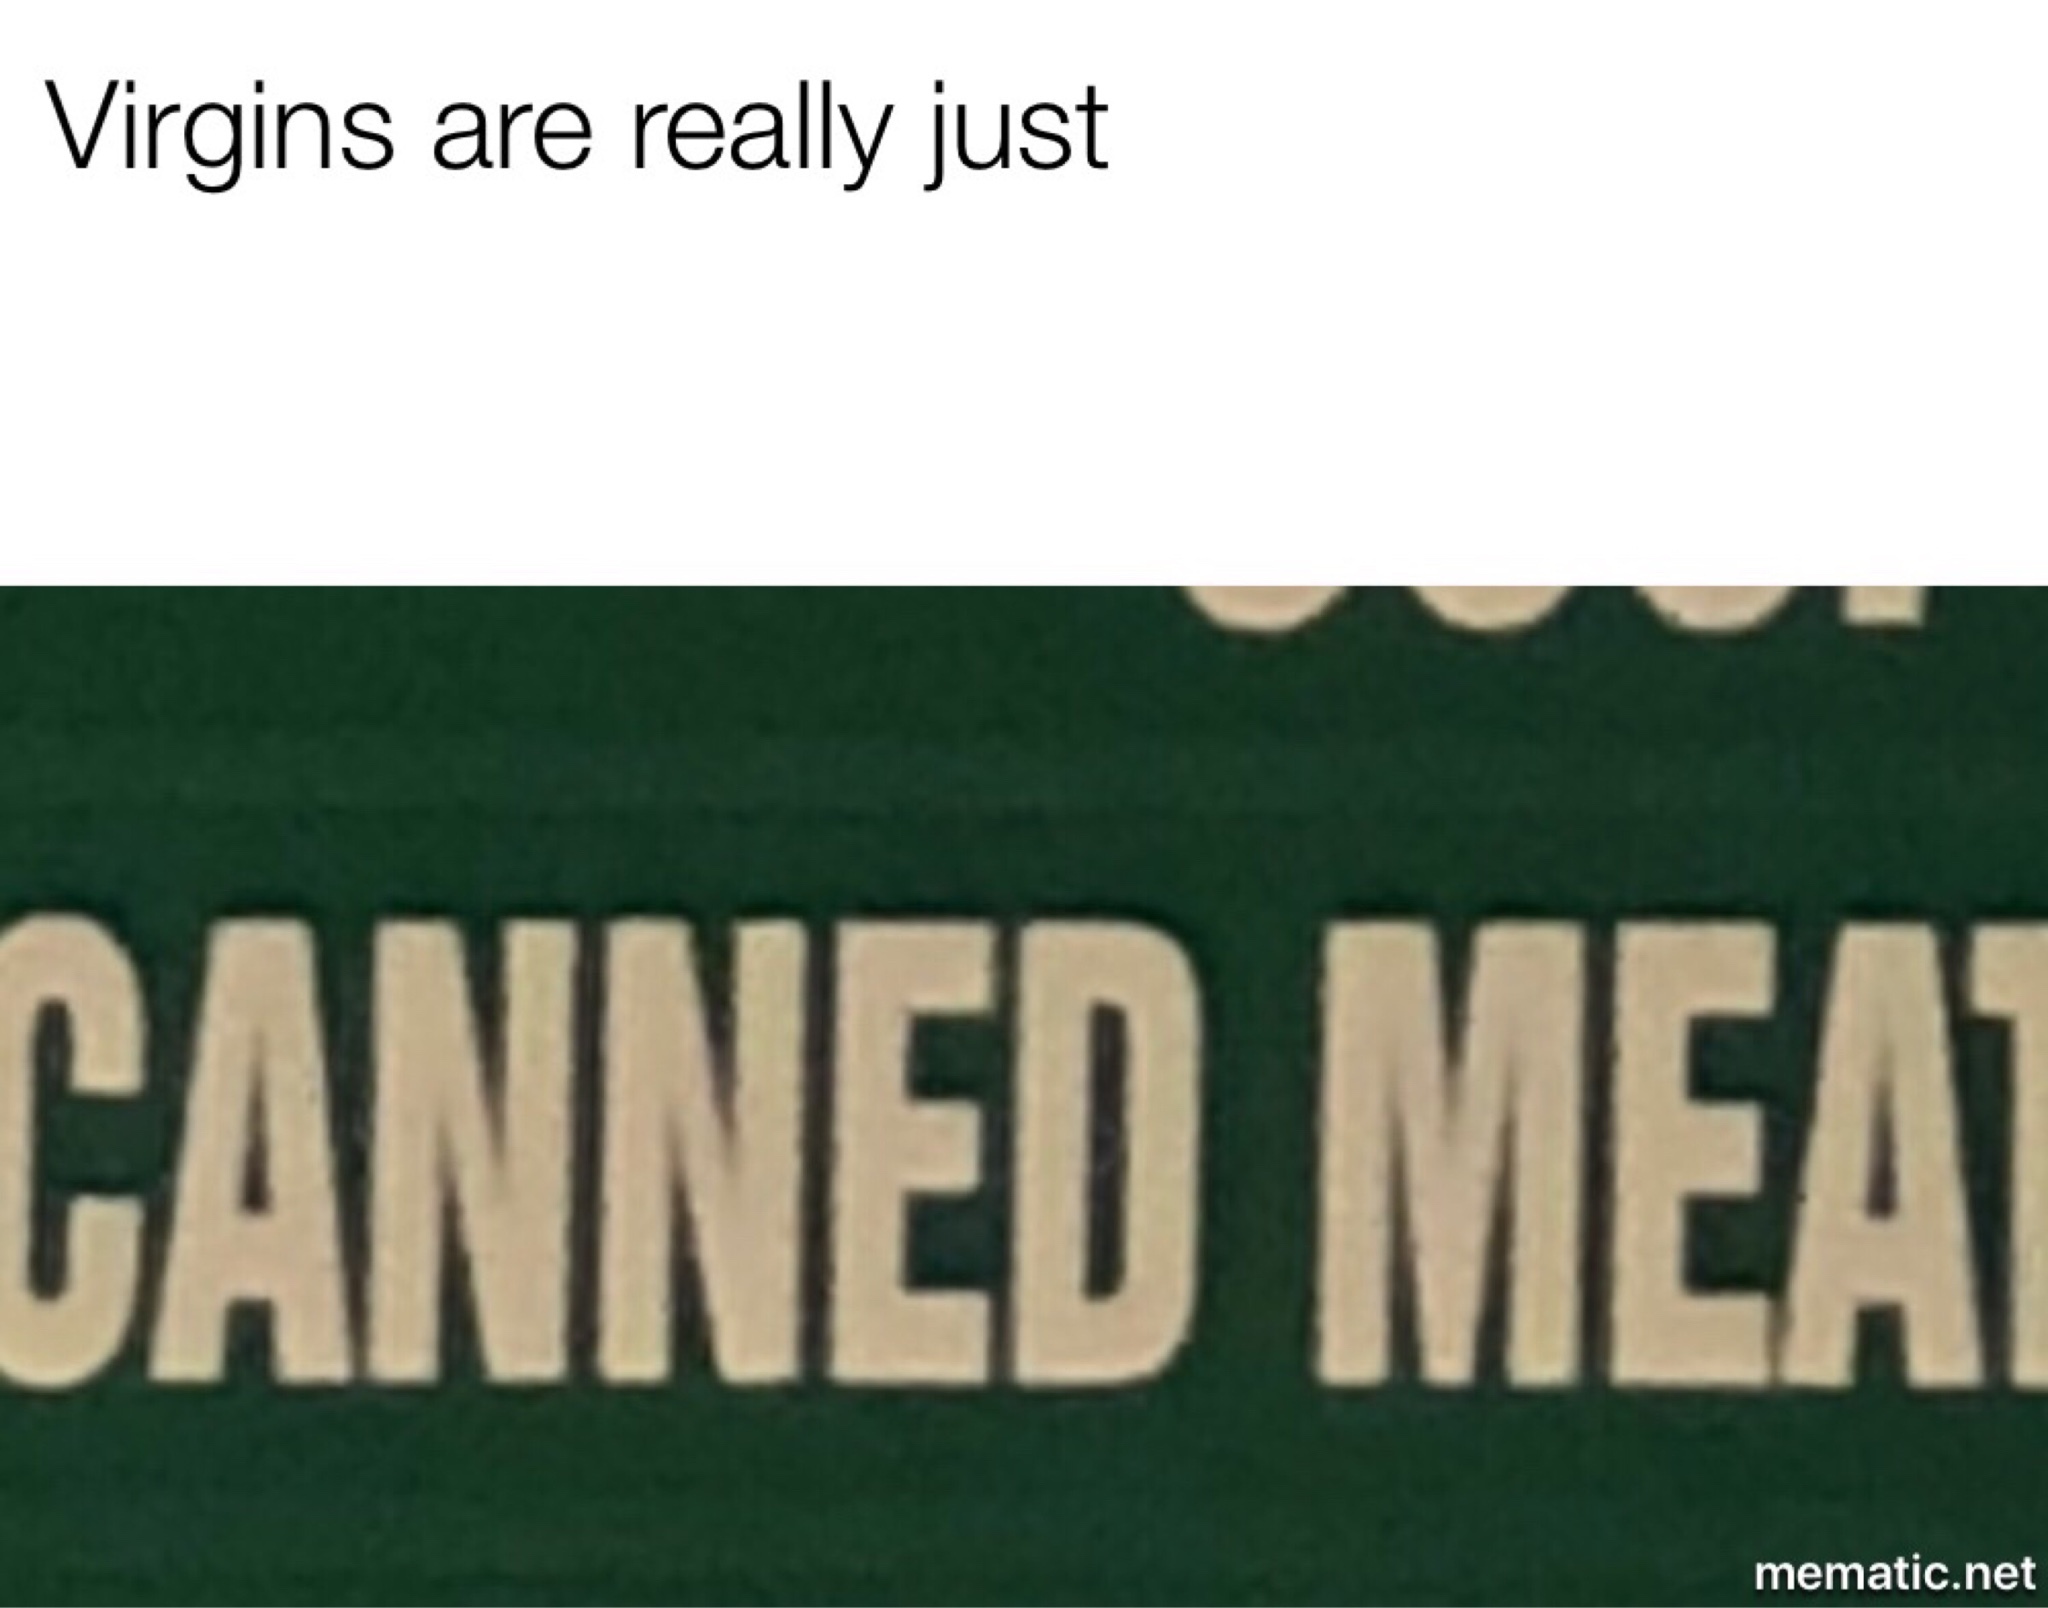 virgins are canned meat change my mind - meme